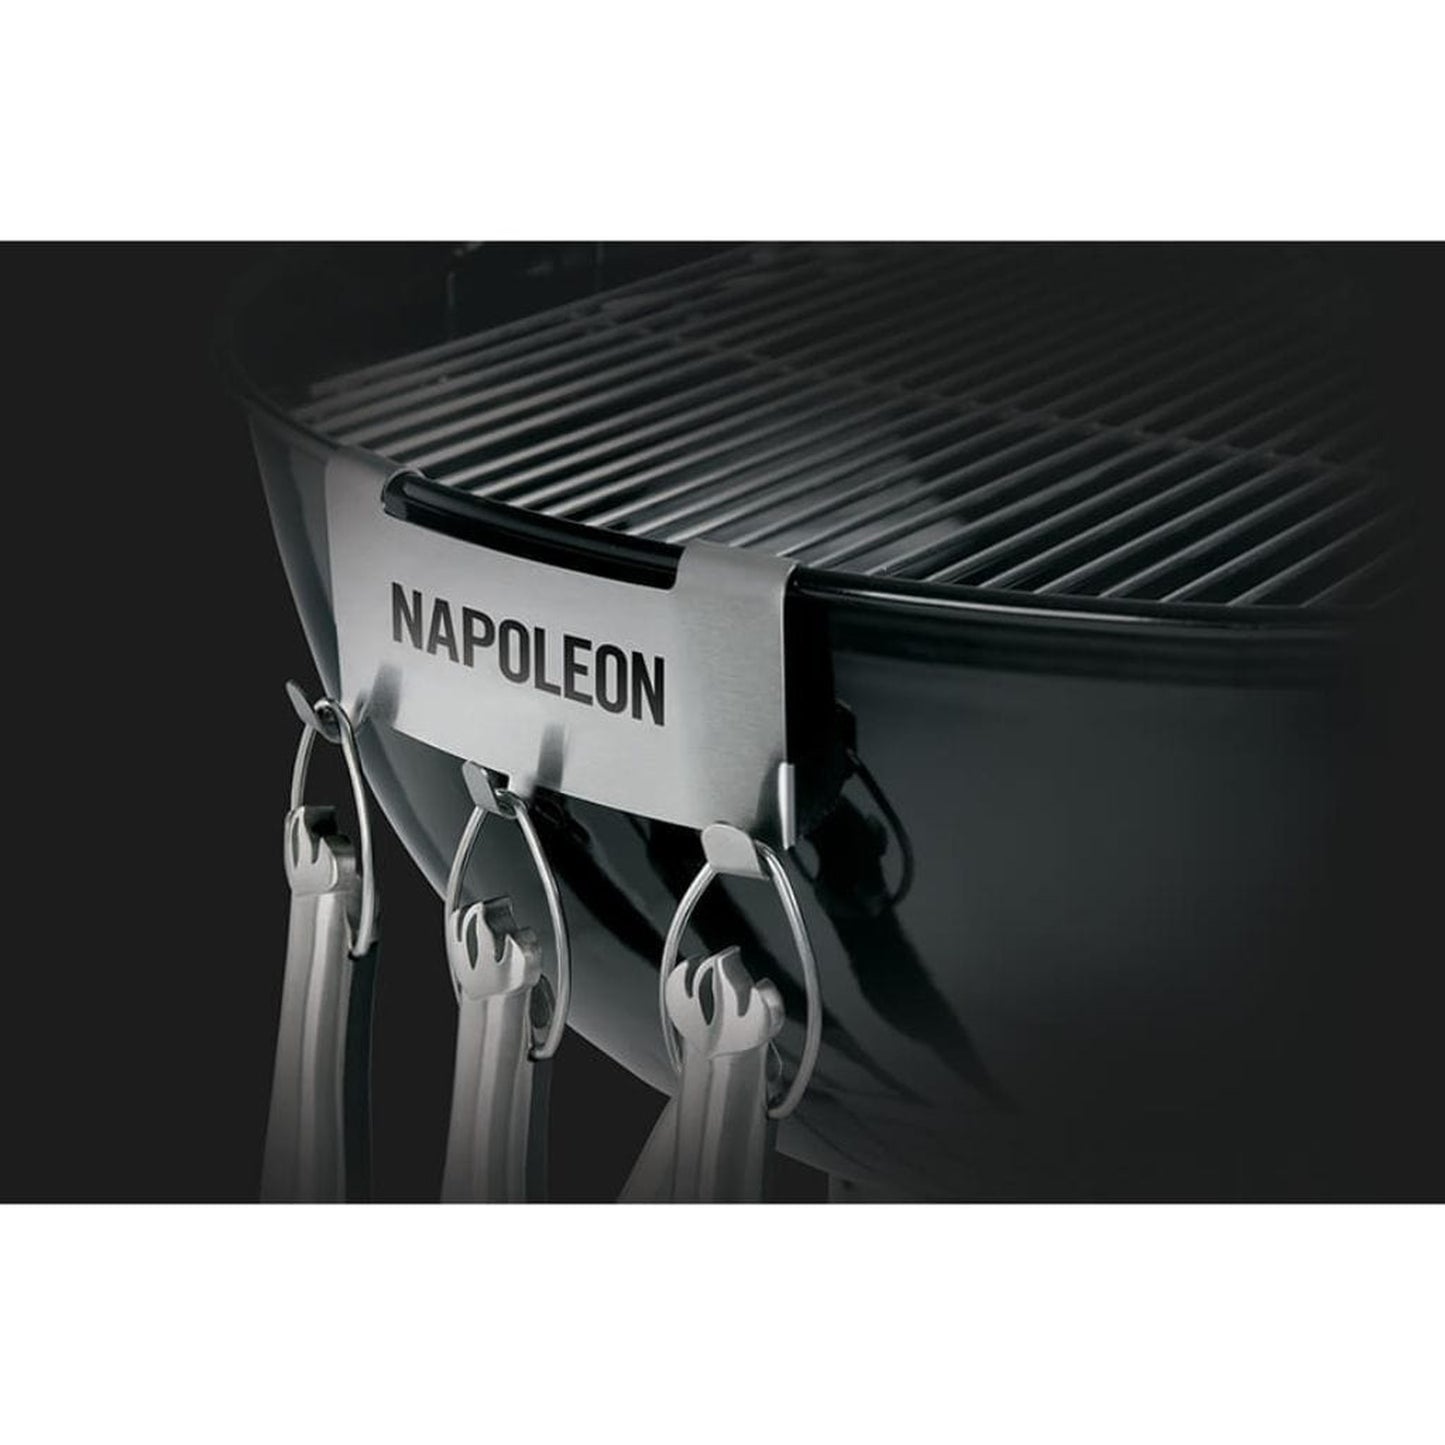 Napoleon 55100 Tool Hook Bracket for Kettle Grill